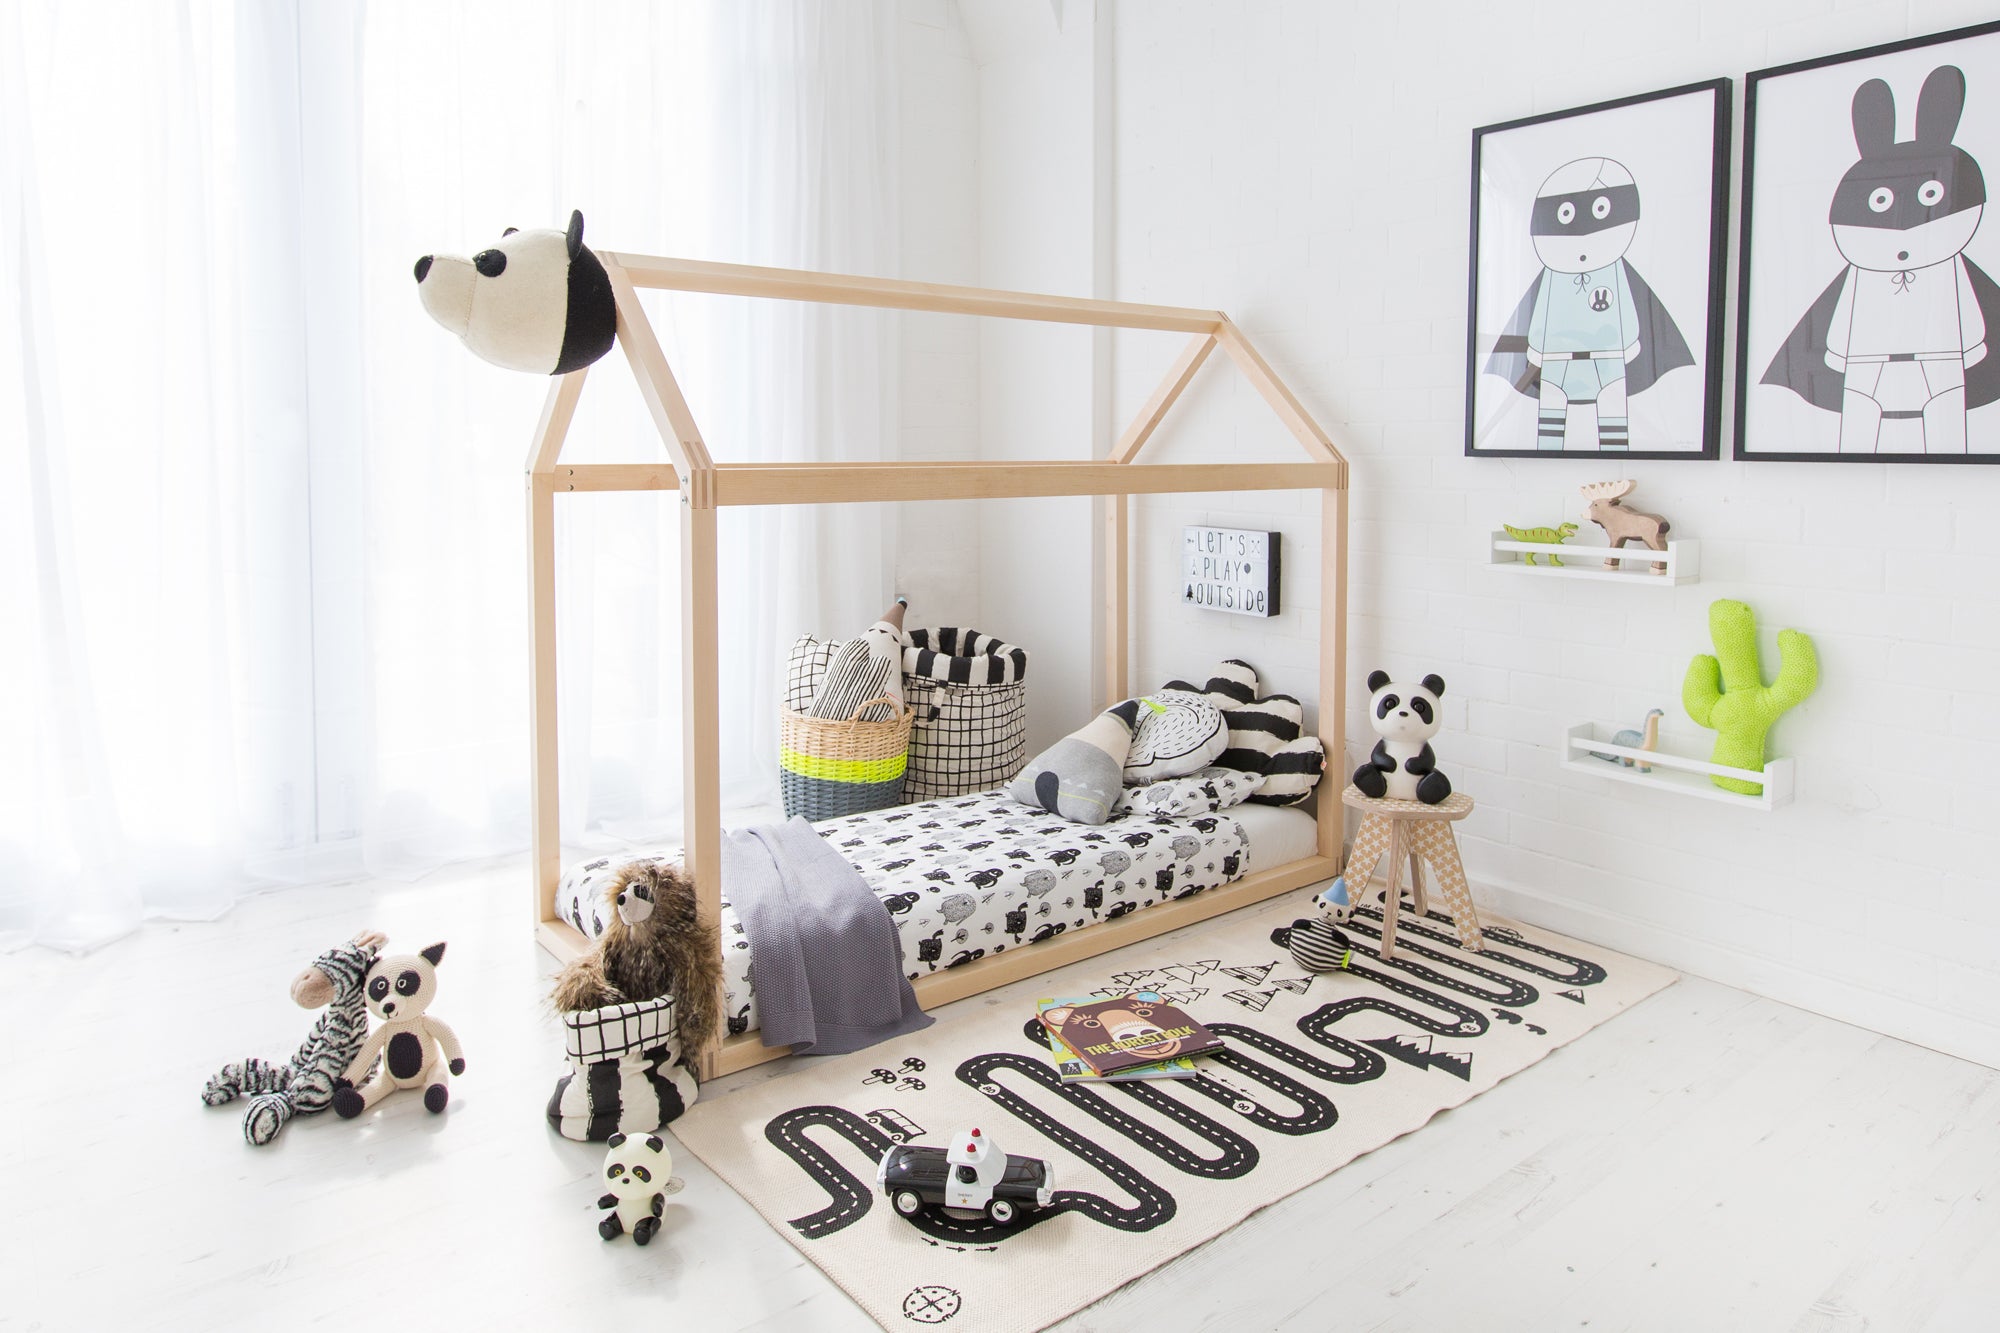 Summer Camp! Children’s Bedroom, designed and styled by Bobby Rabbit.